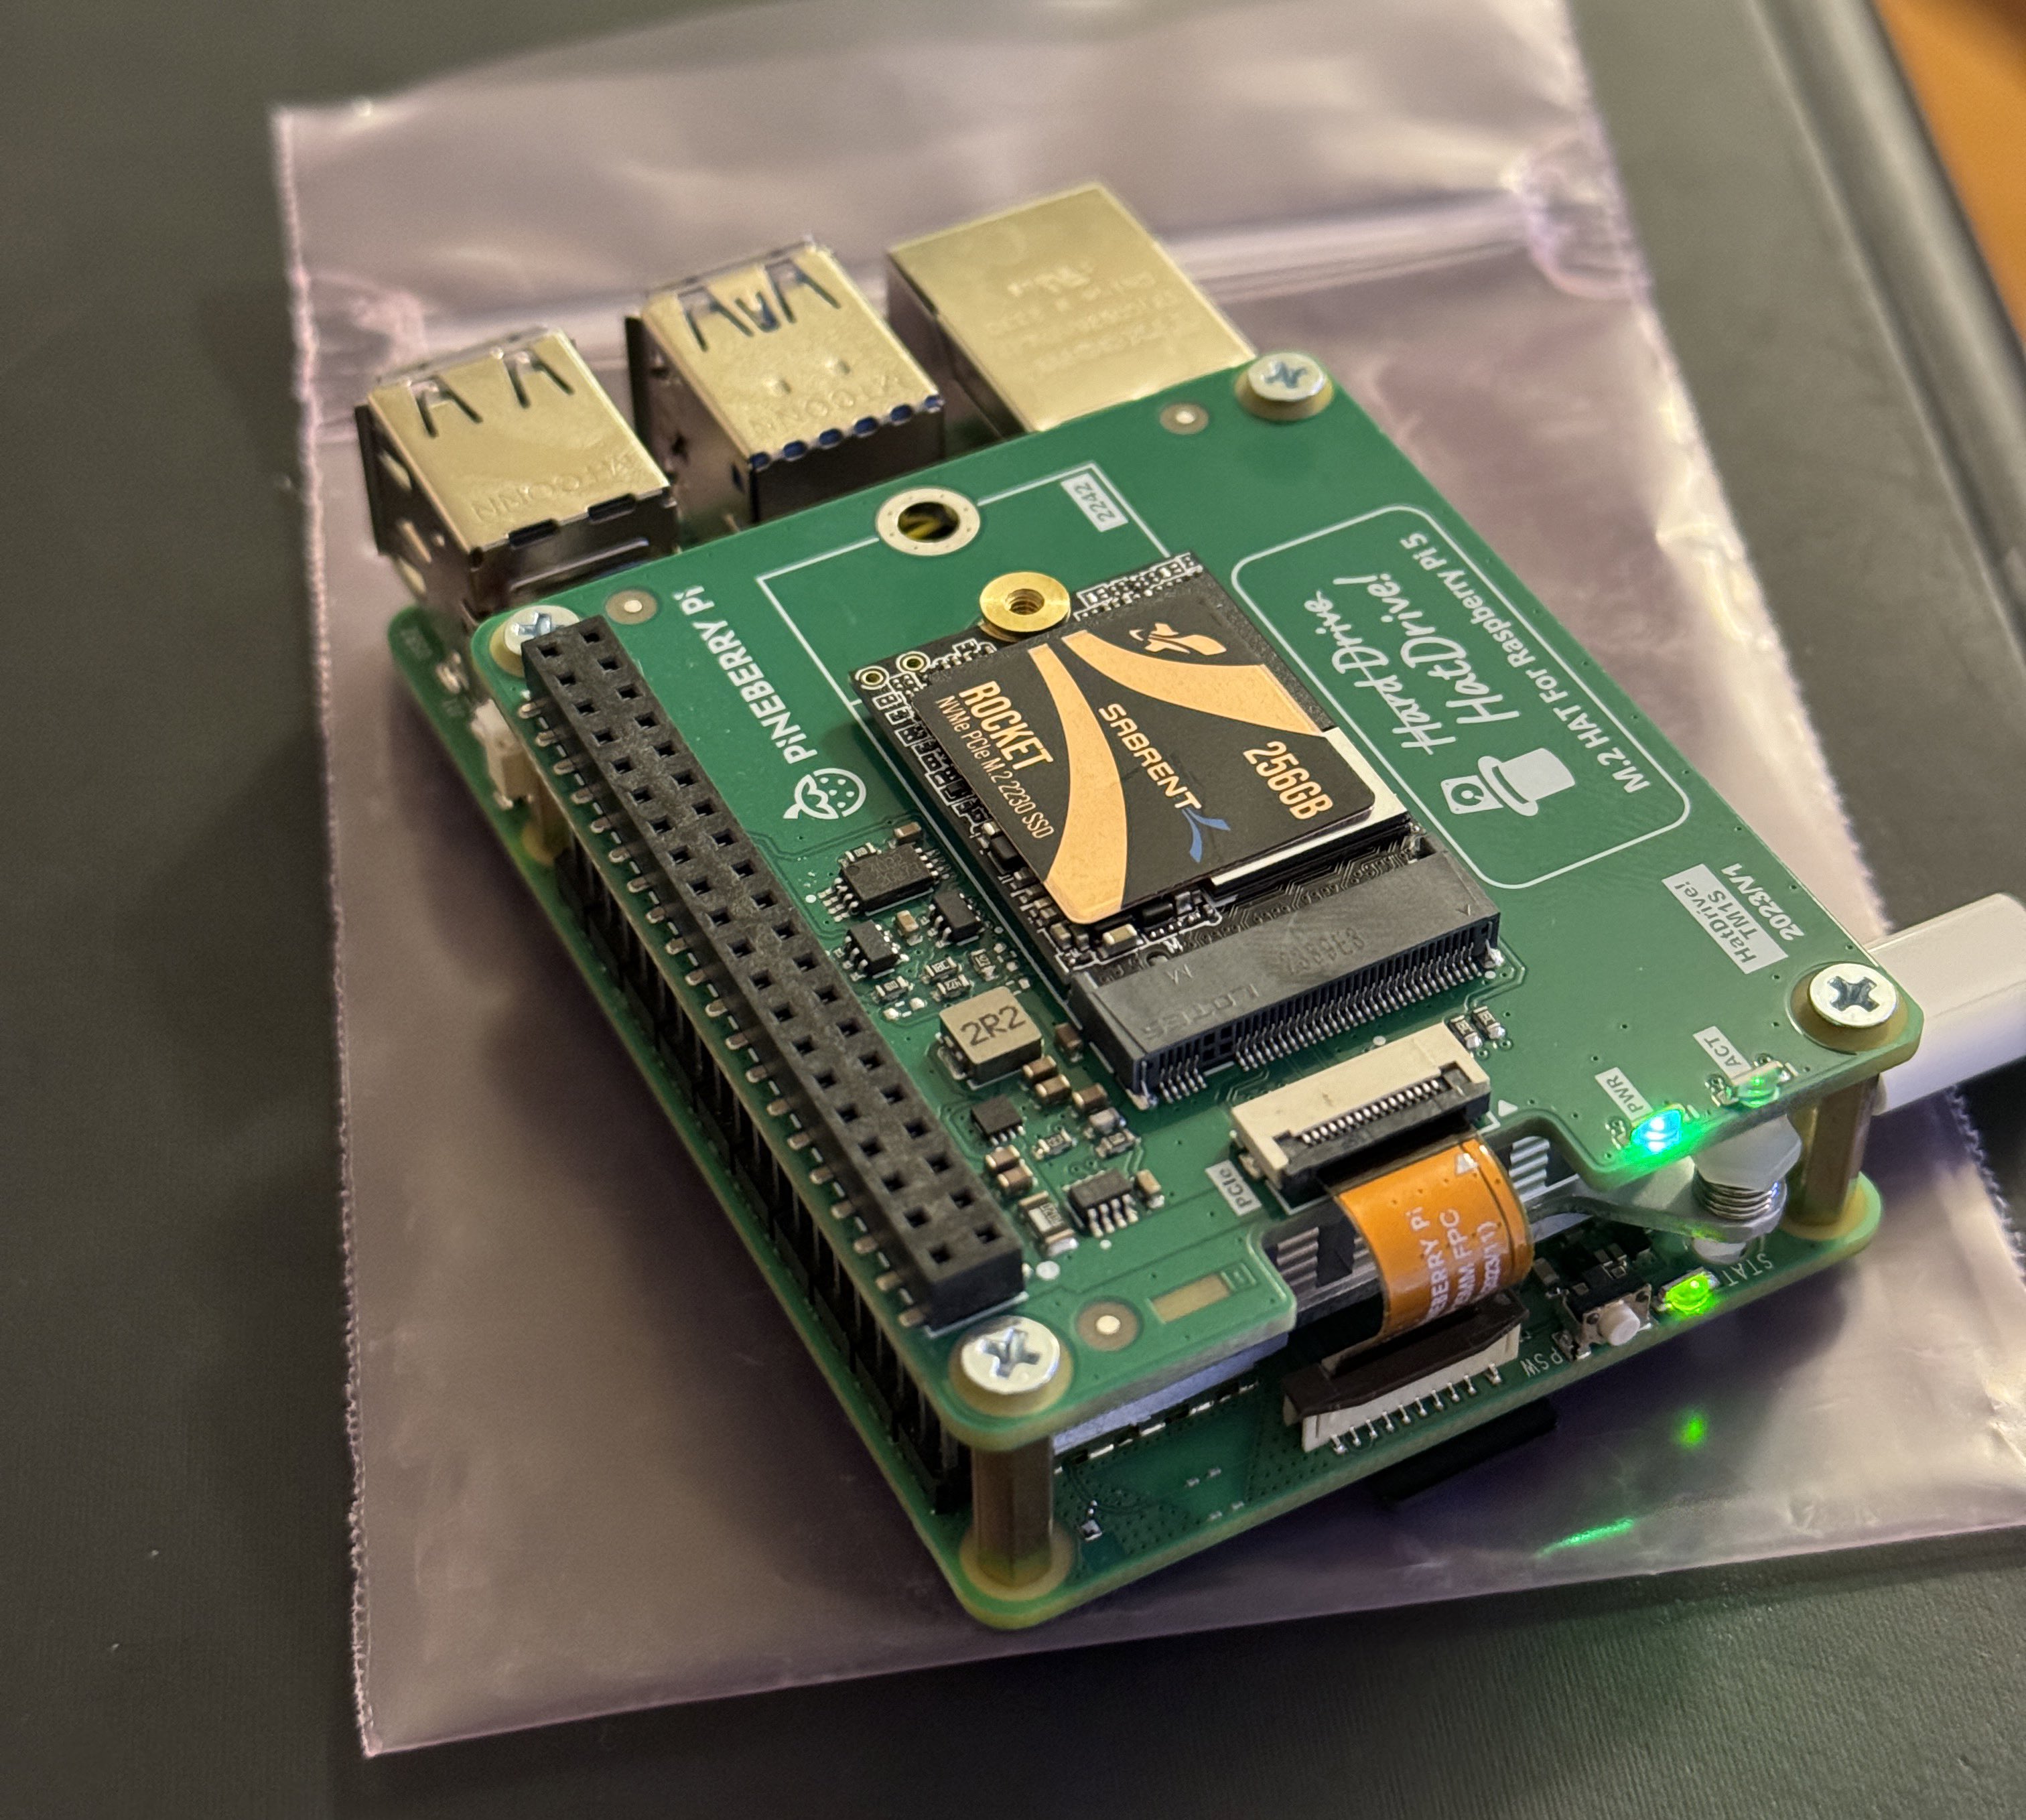 Pineberry Pi HatDrive: Using NVMe SSDs With The Raspberry Pi 5